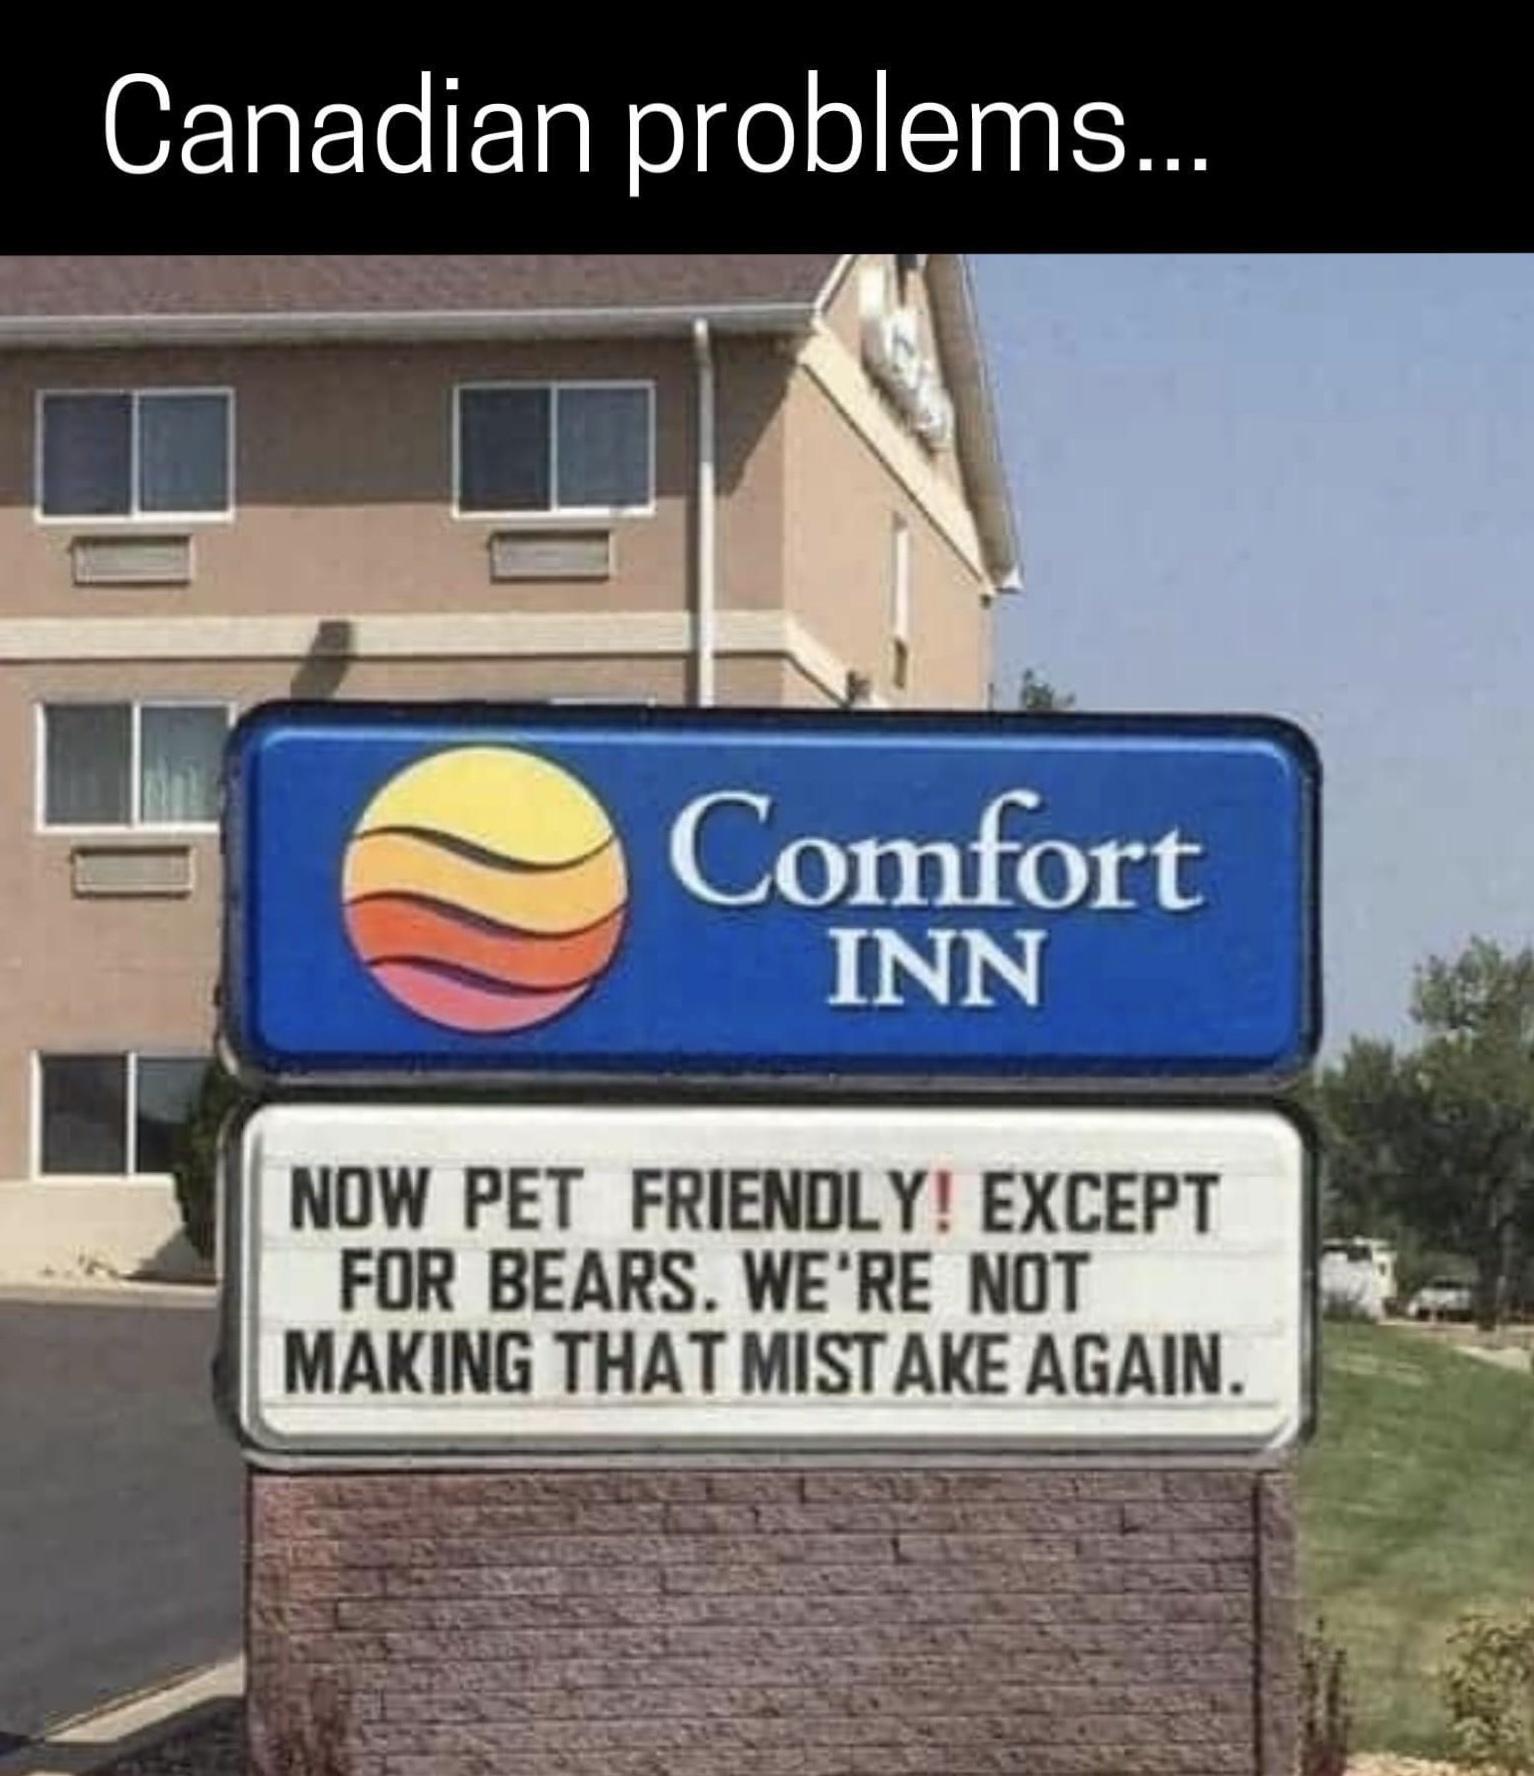 blursed sign - Canadian problems... Comfort Inn Now Pet Friendly! Except For Bears. We'Re Not Making That Mistake Again.